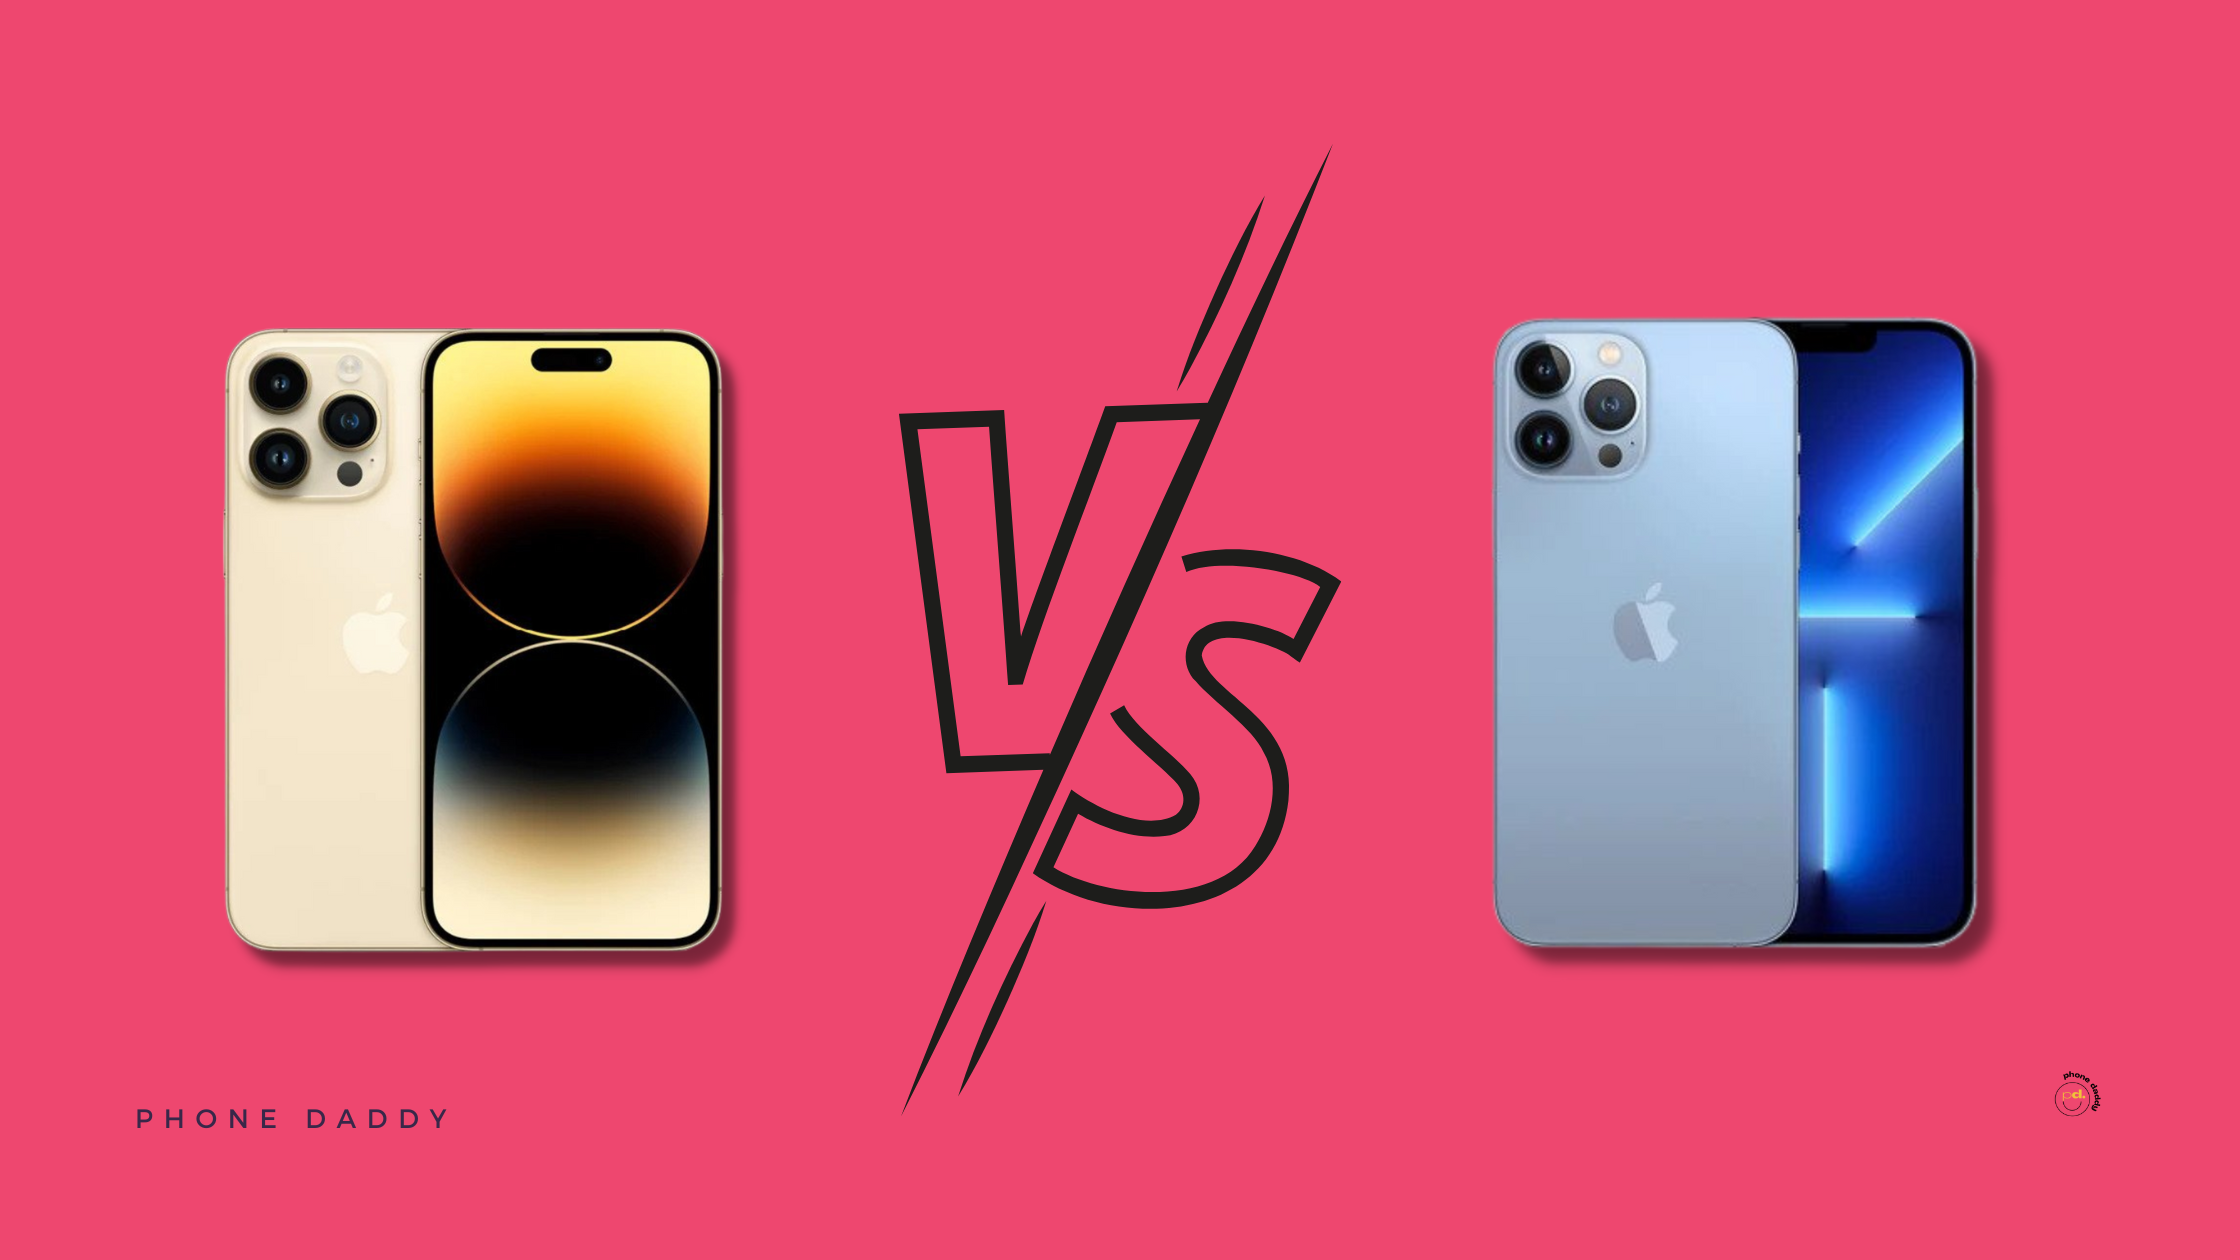 Apple iPhone 14 Pro Max vs iPhone 13 Pro Max: Which should you pick?